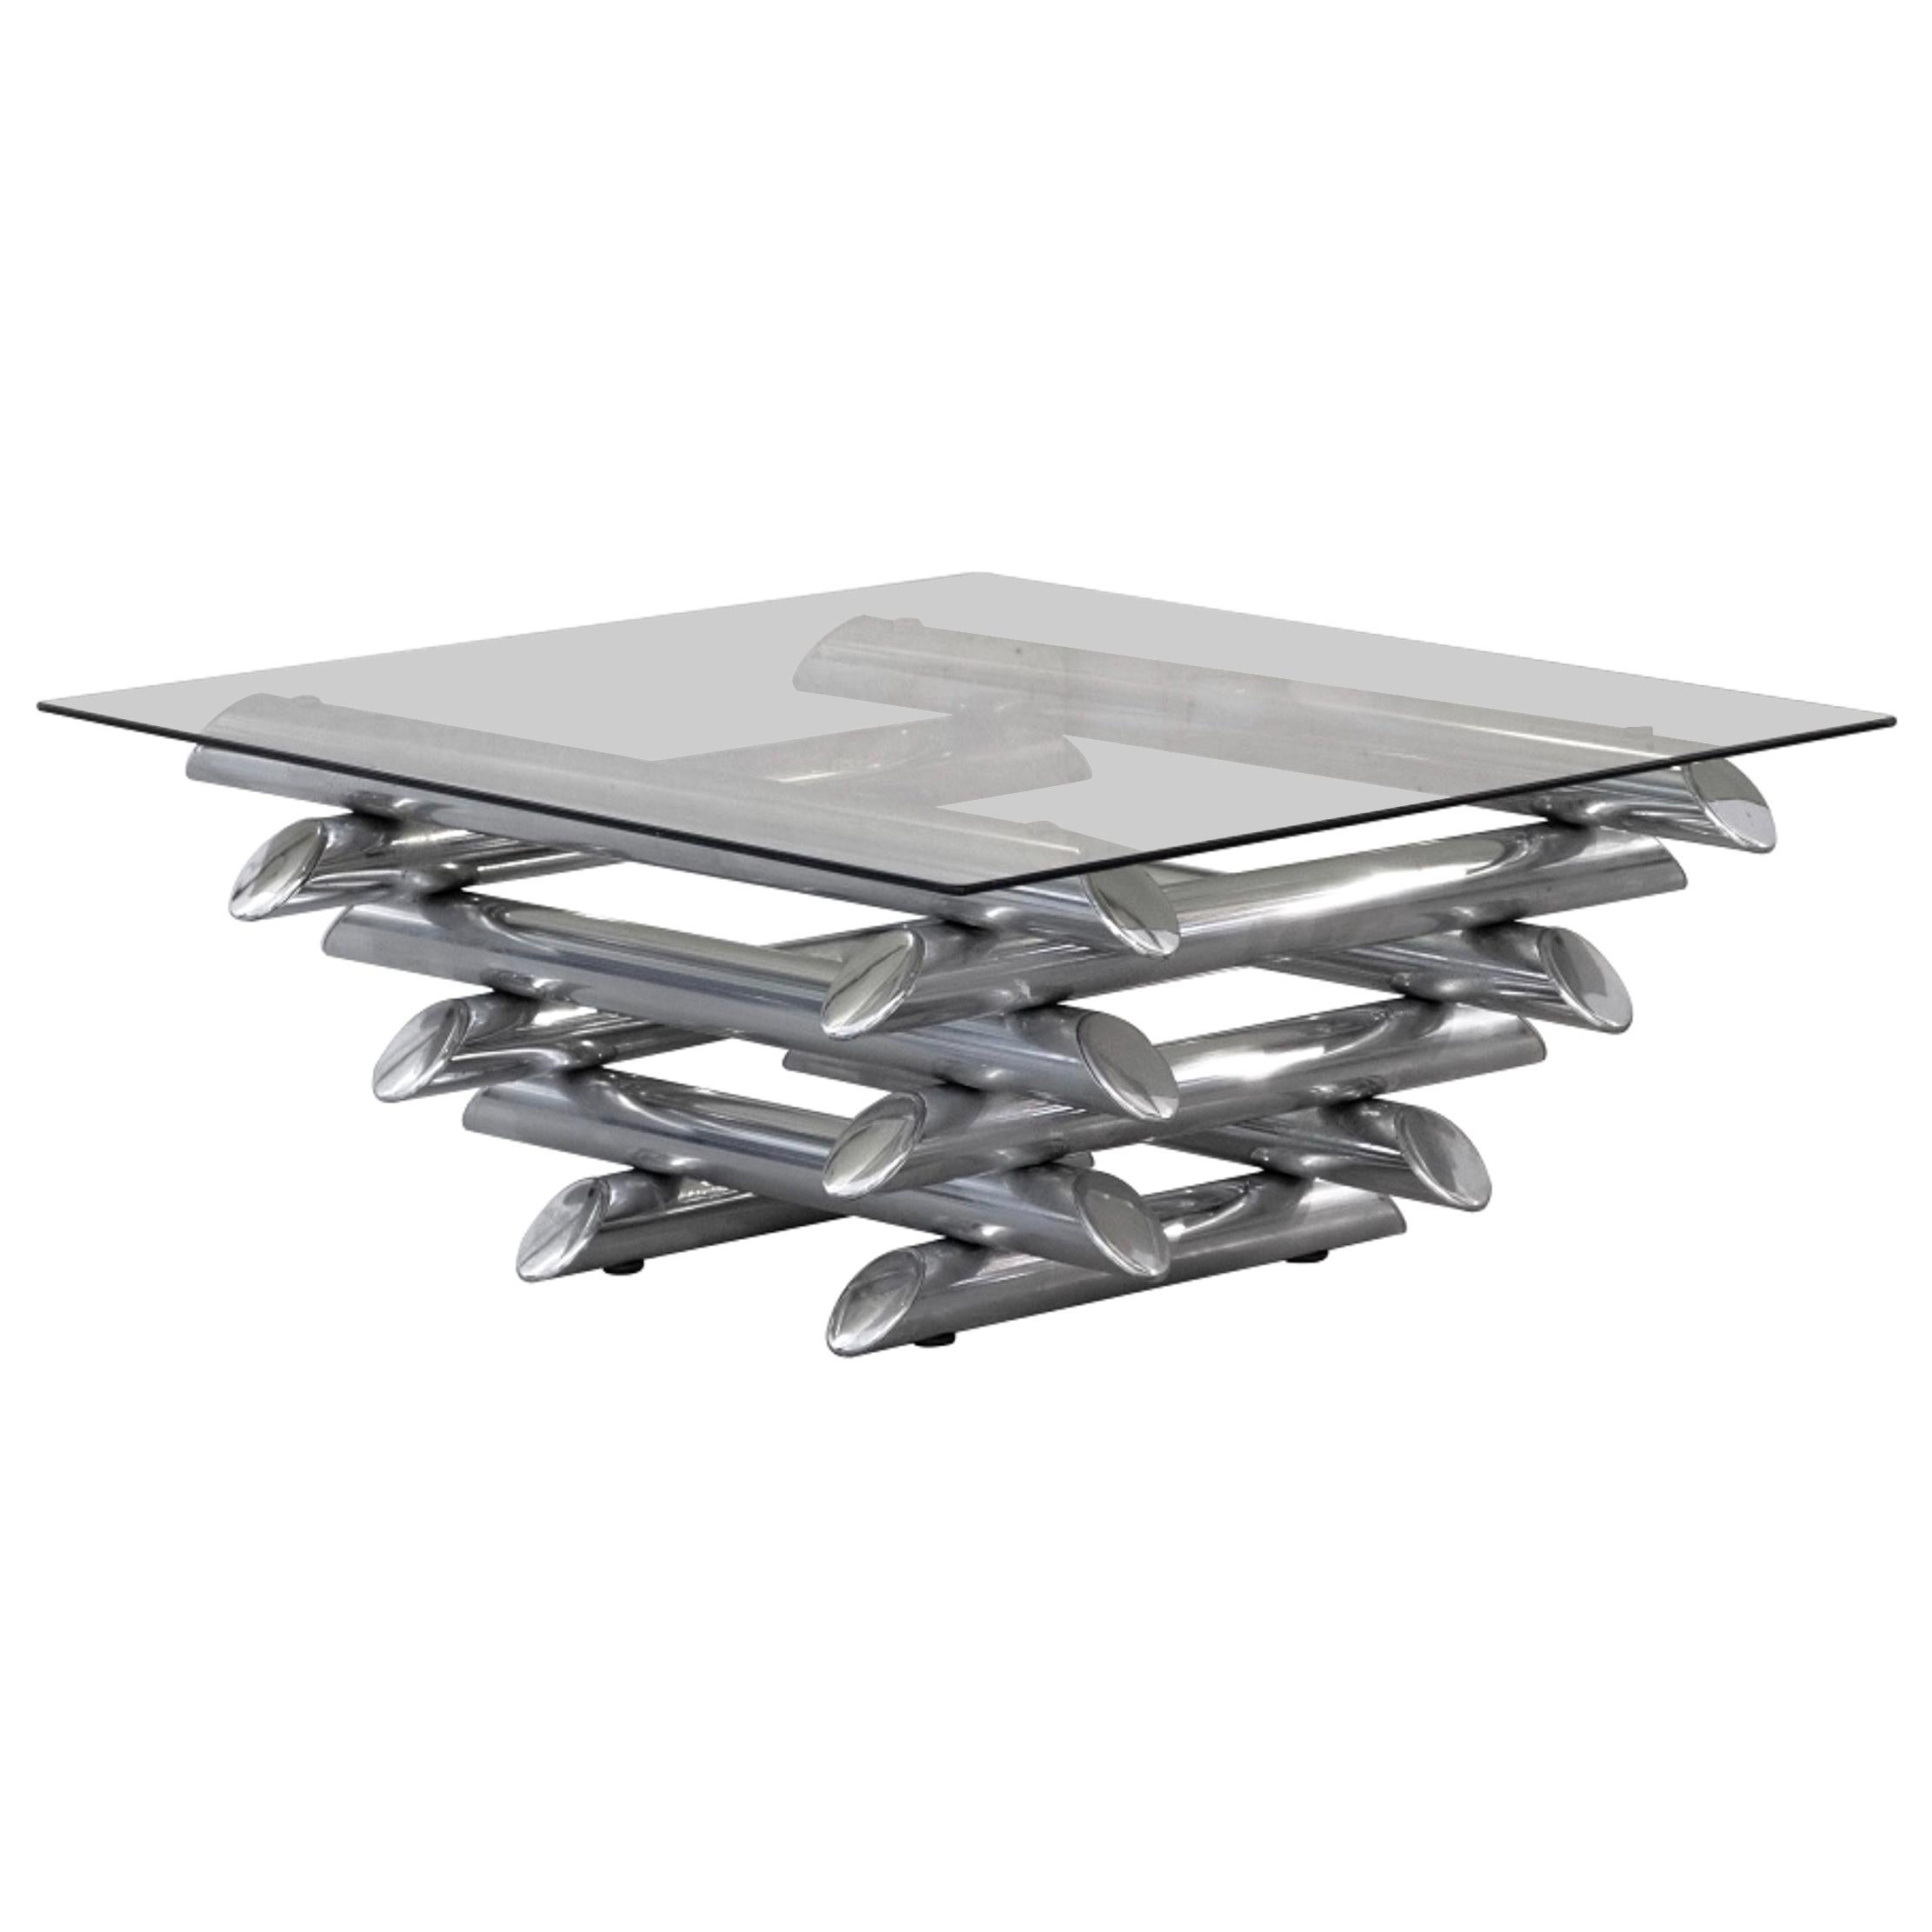 Steel Coffee Table attributed to Willy Rizzo, 1970s